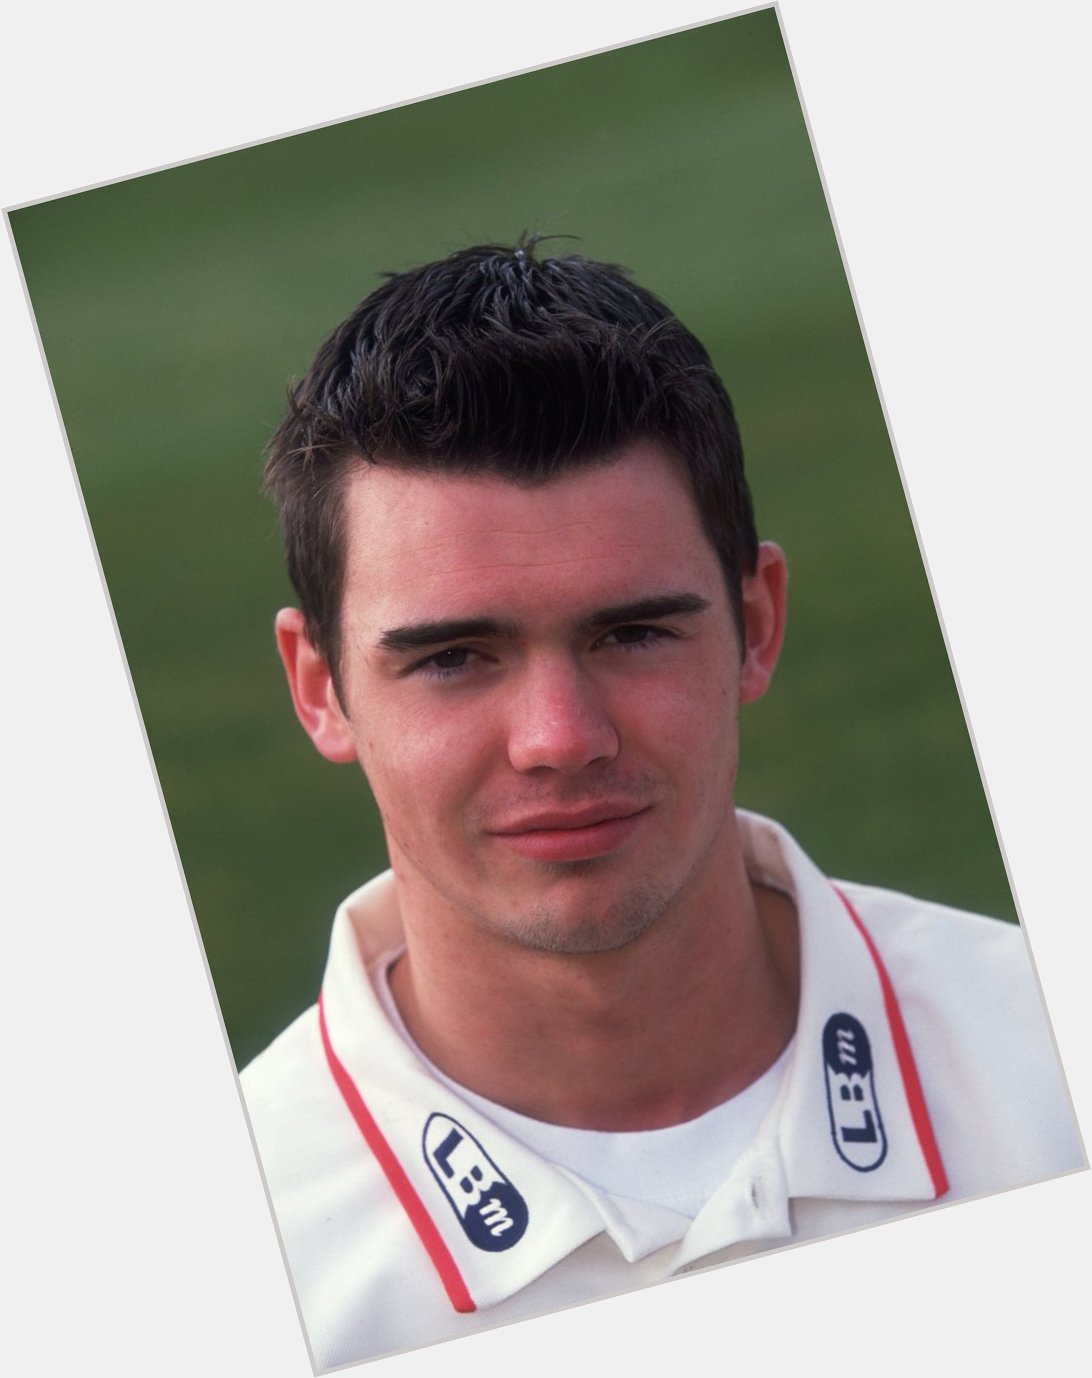 JAMES ANDERSON TURNS TODAY 40 .  HAPPY BIRTHDAY   ANDERSON 